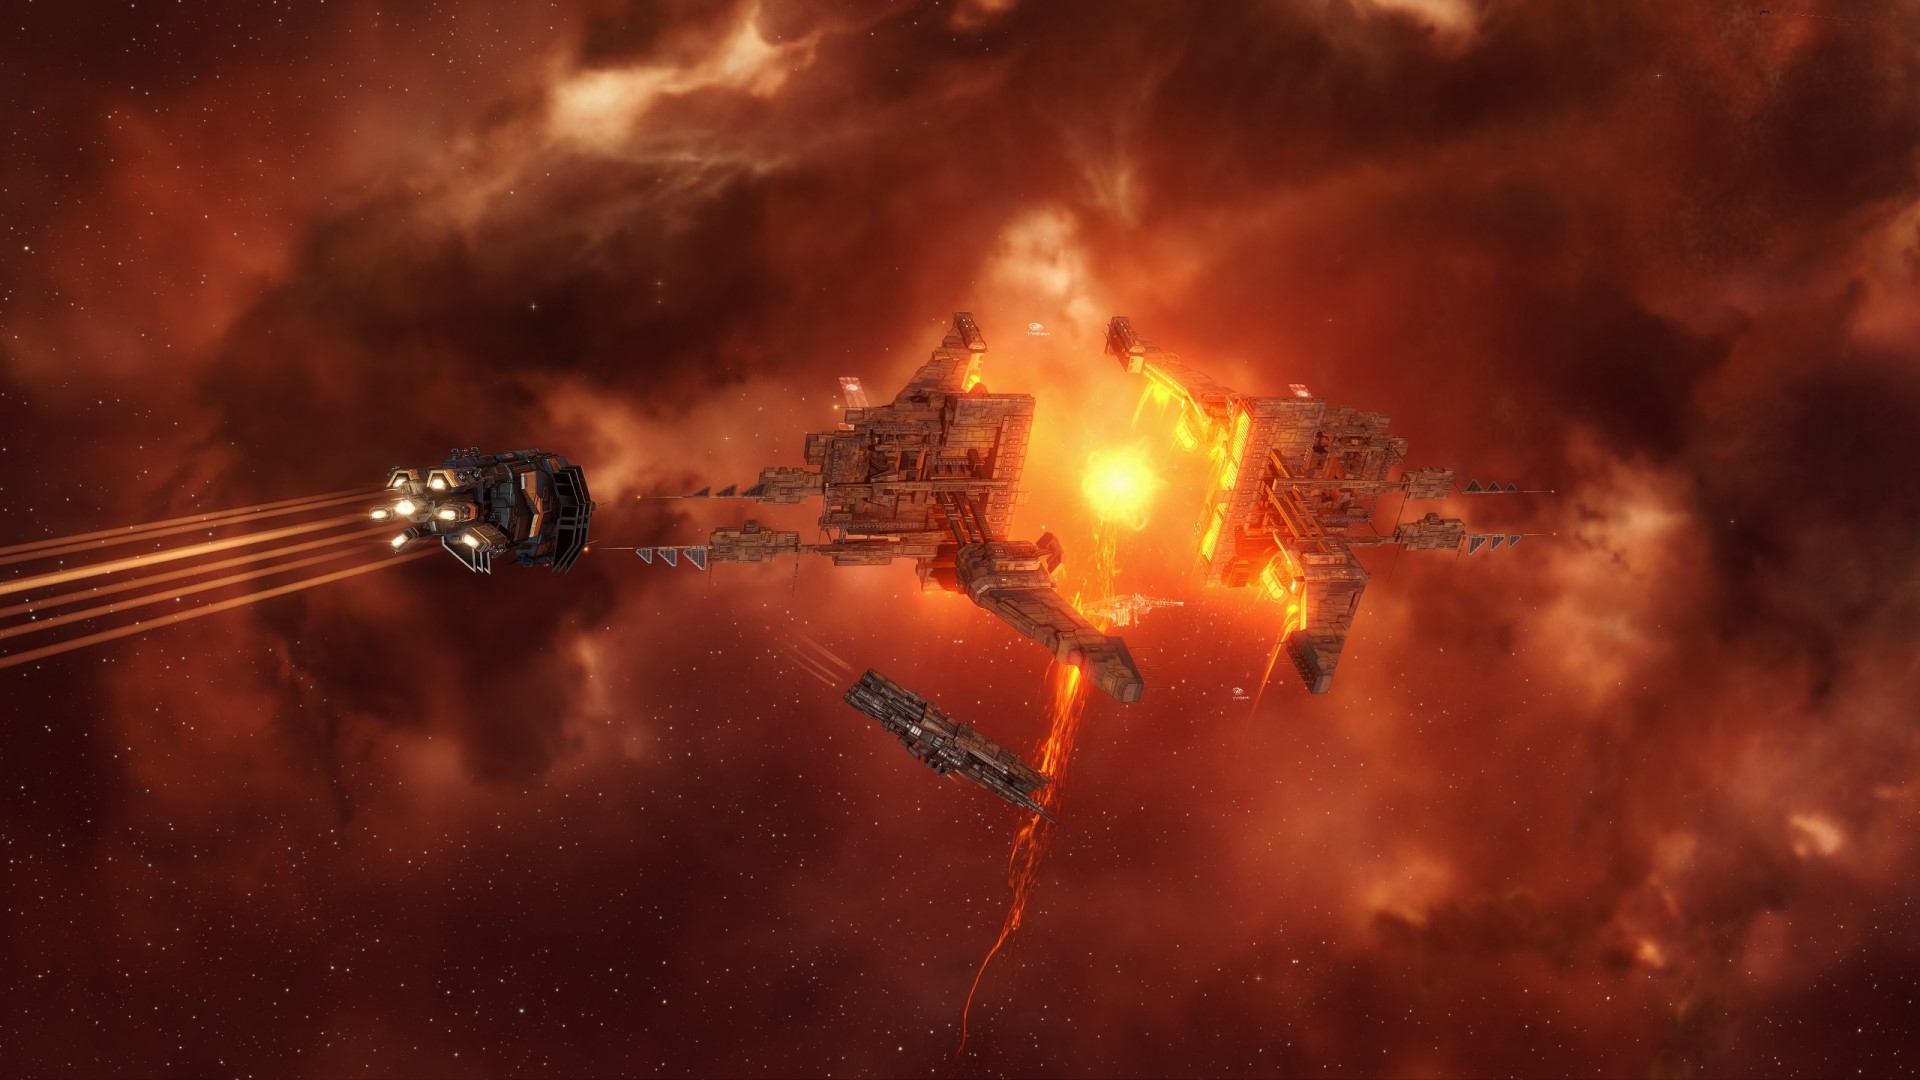 Eve Online is bringing the drama of evolving war to PvE systems